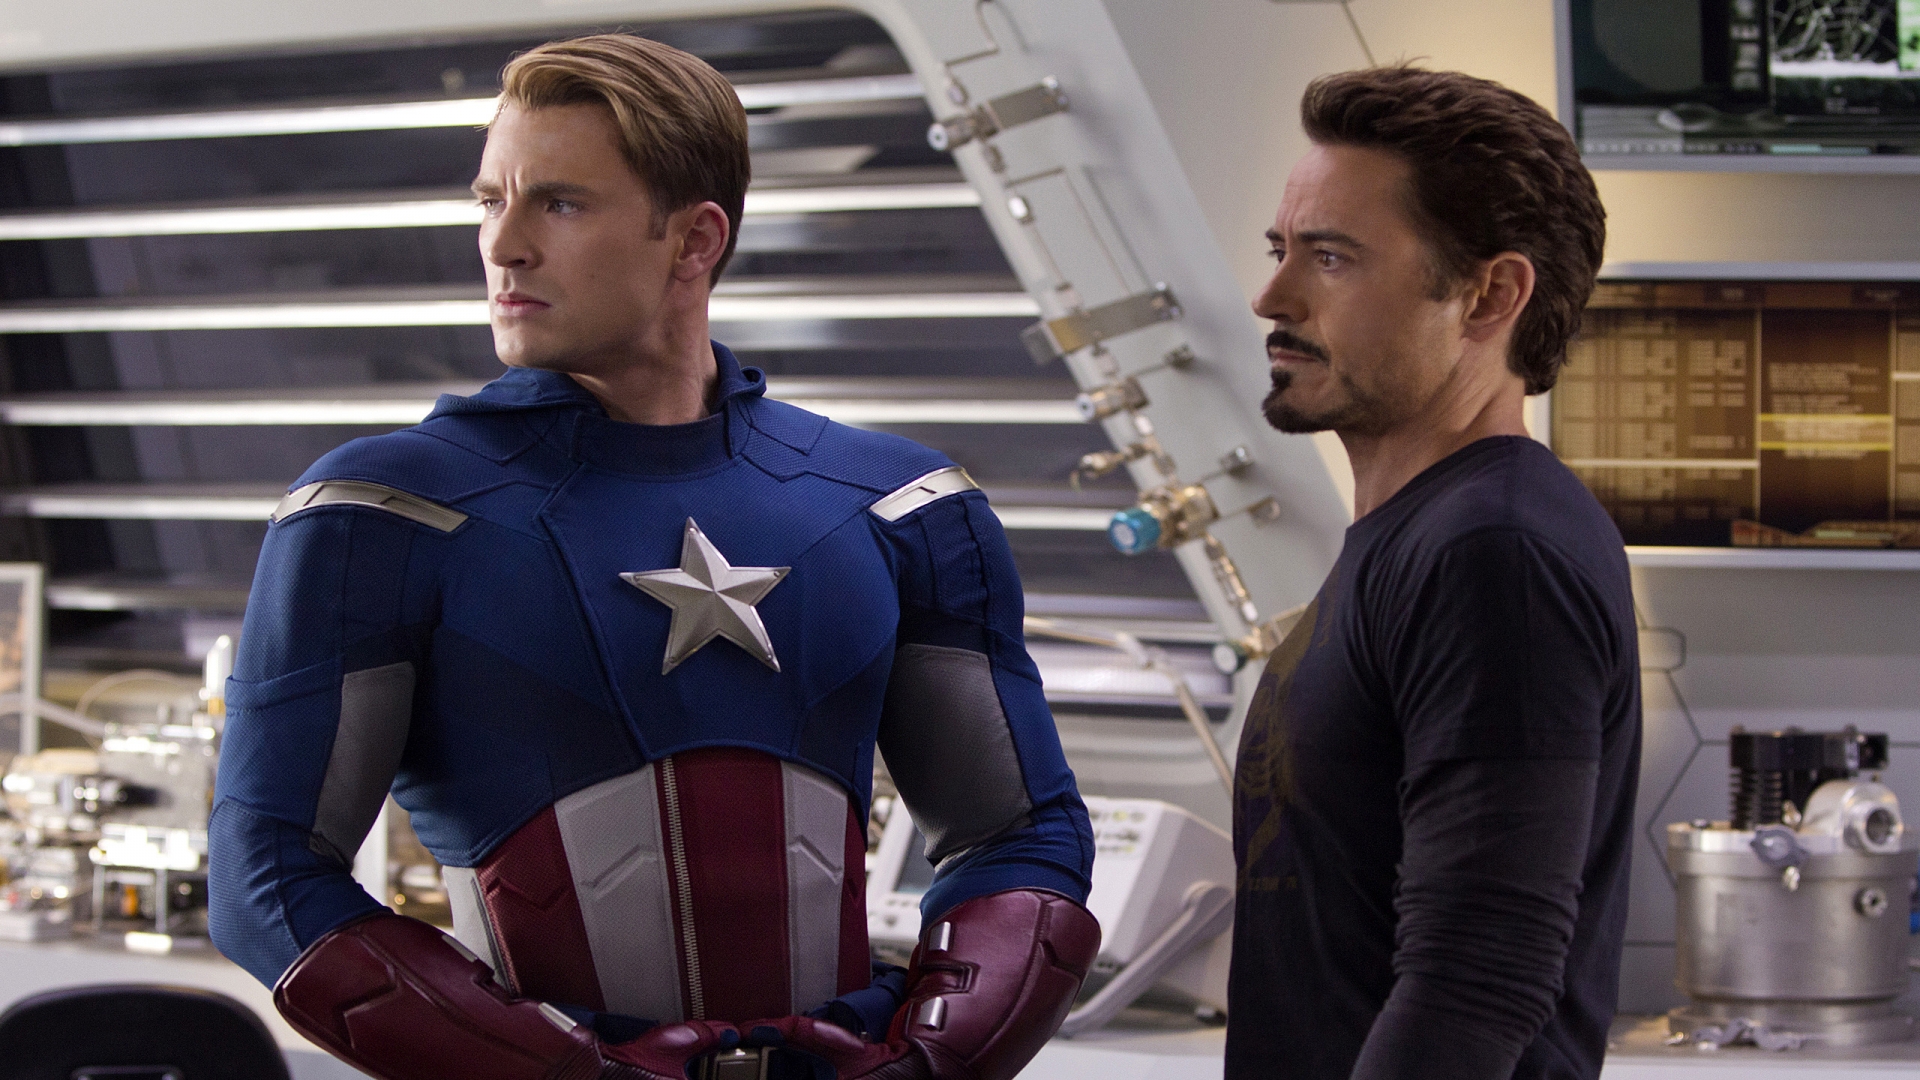 Captain America and Iron Man for 1920 x 1080 HDTV 1080p resolution